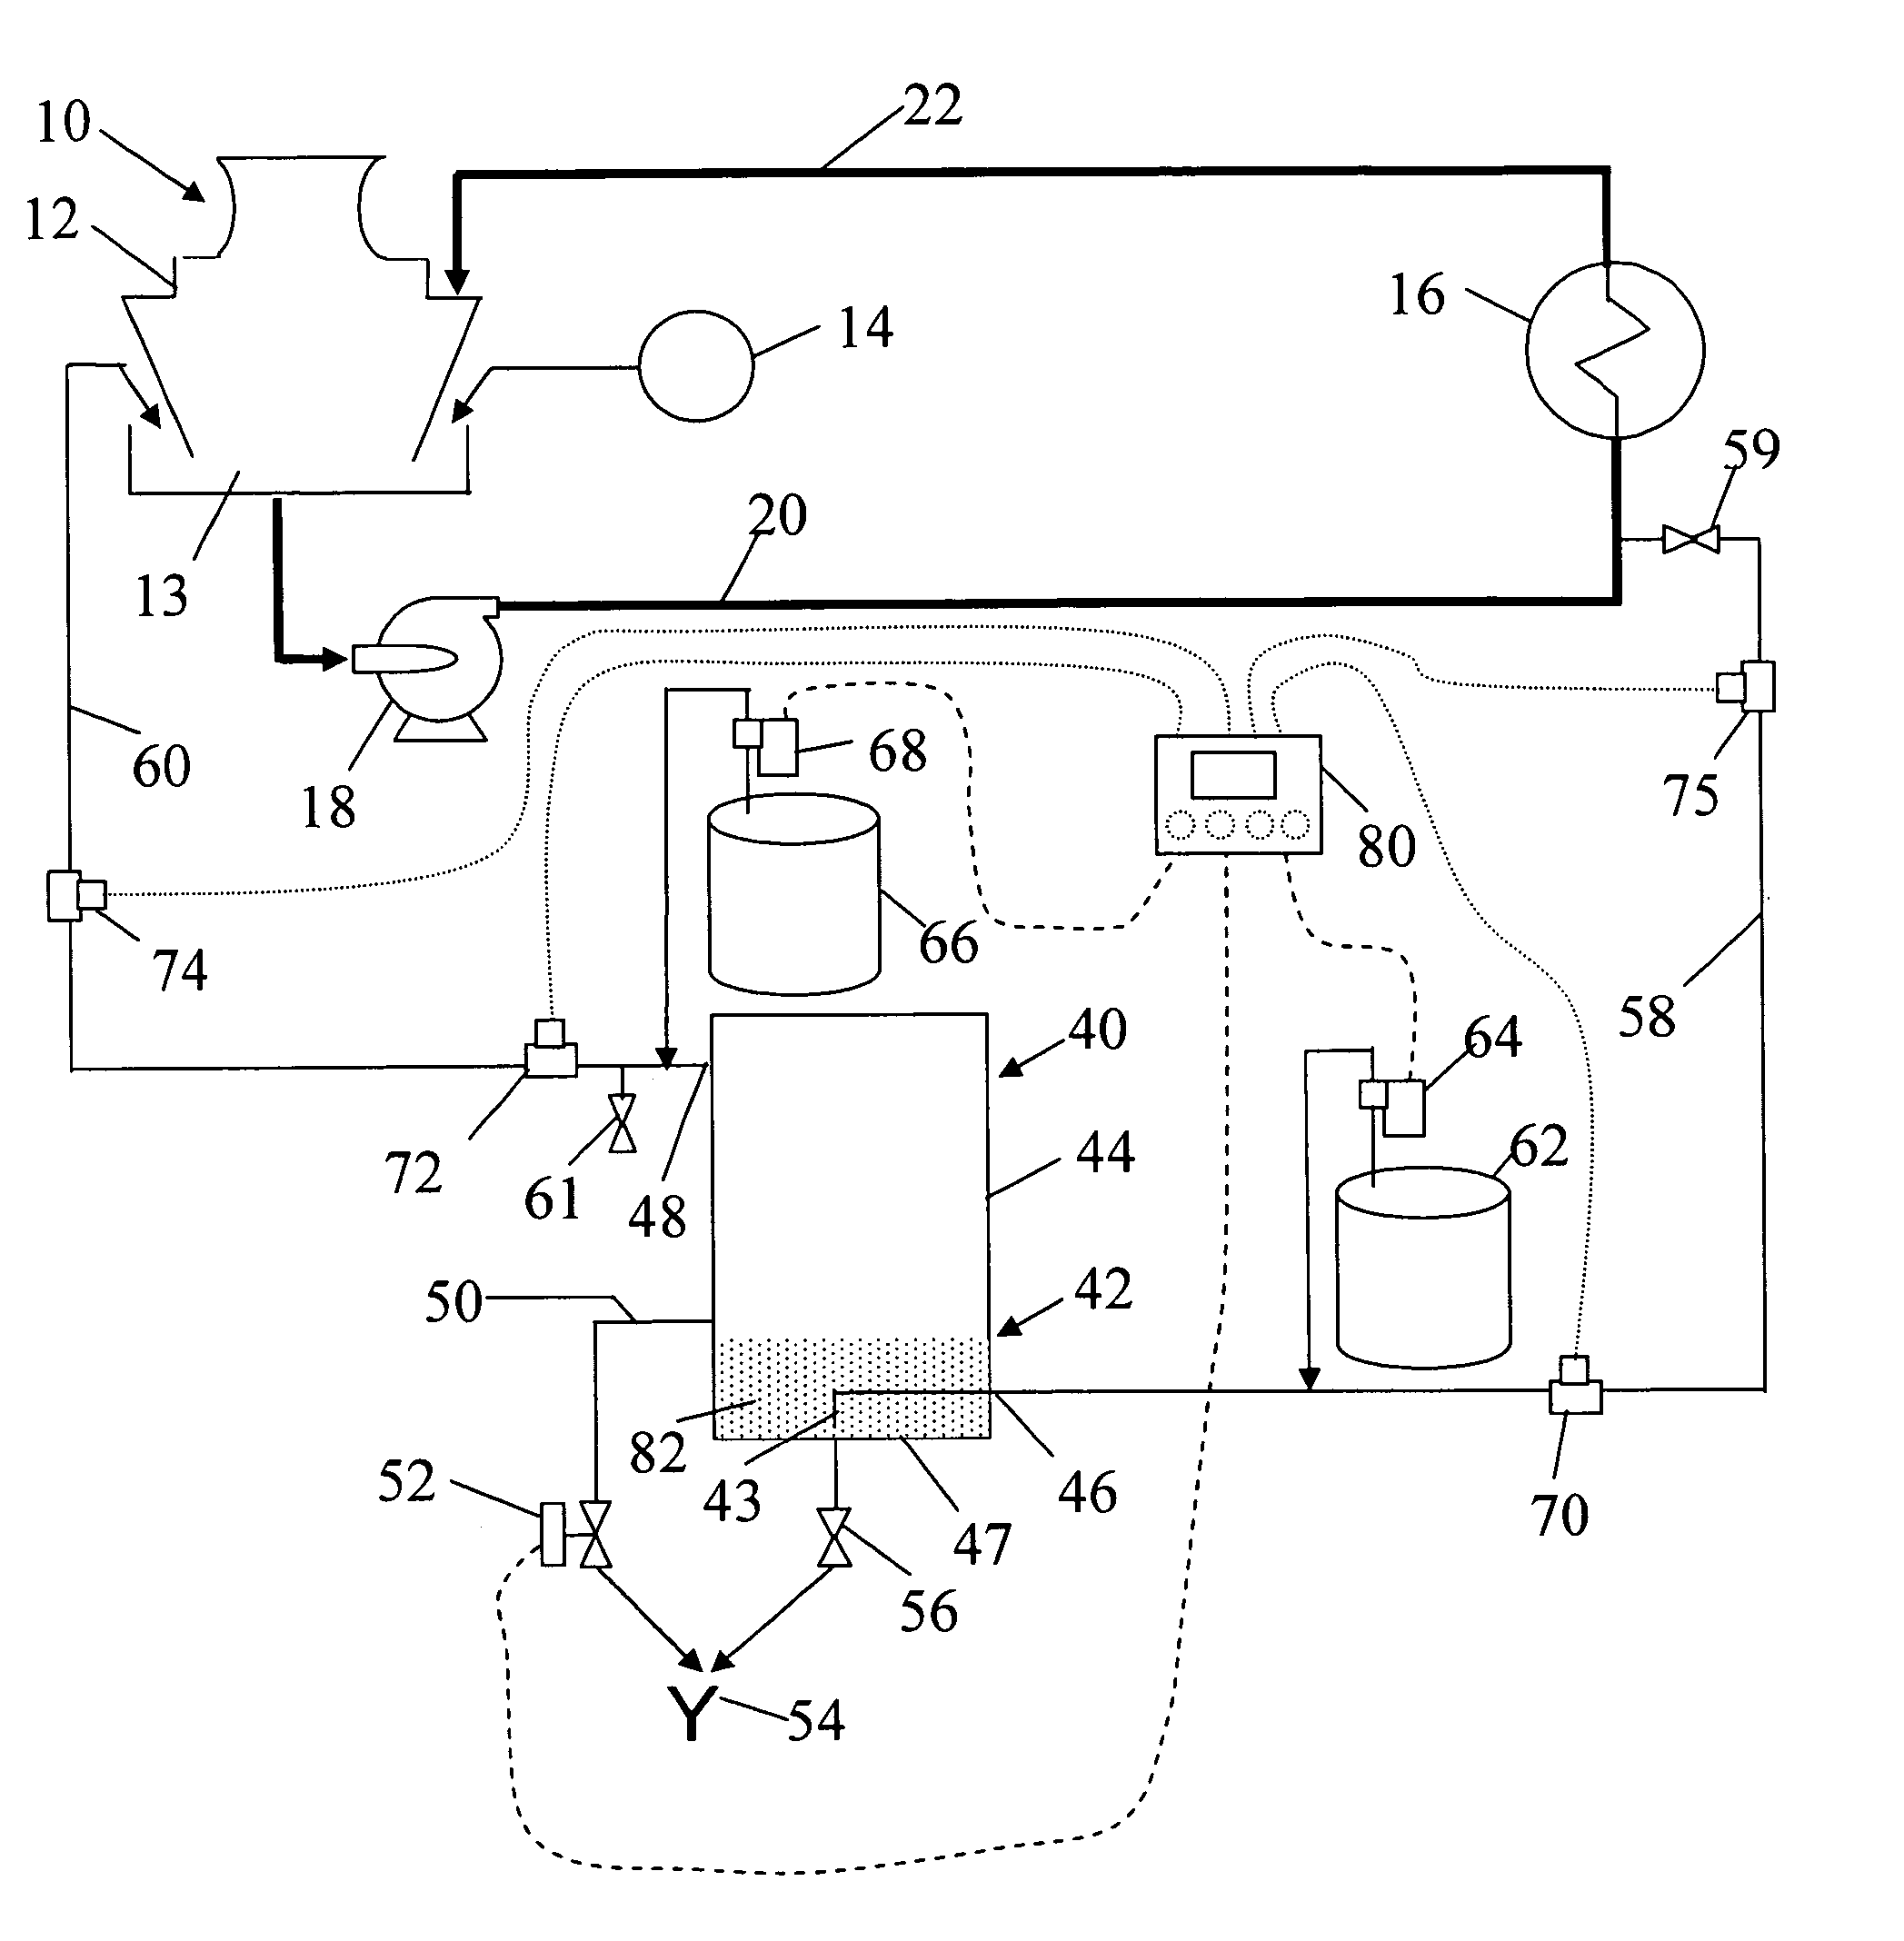 Apparatus and process for water conditioning